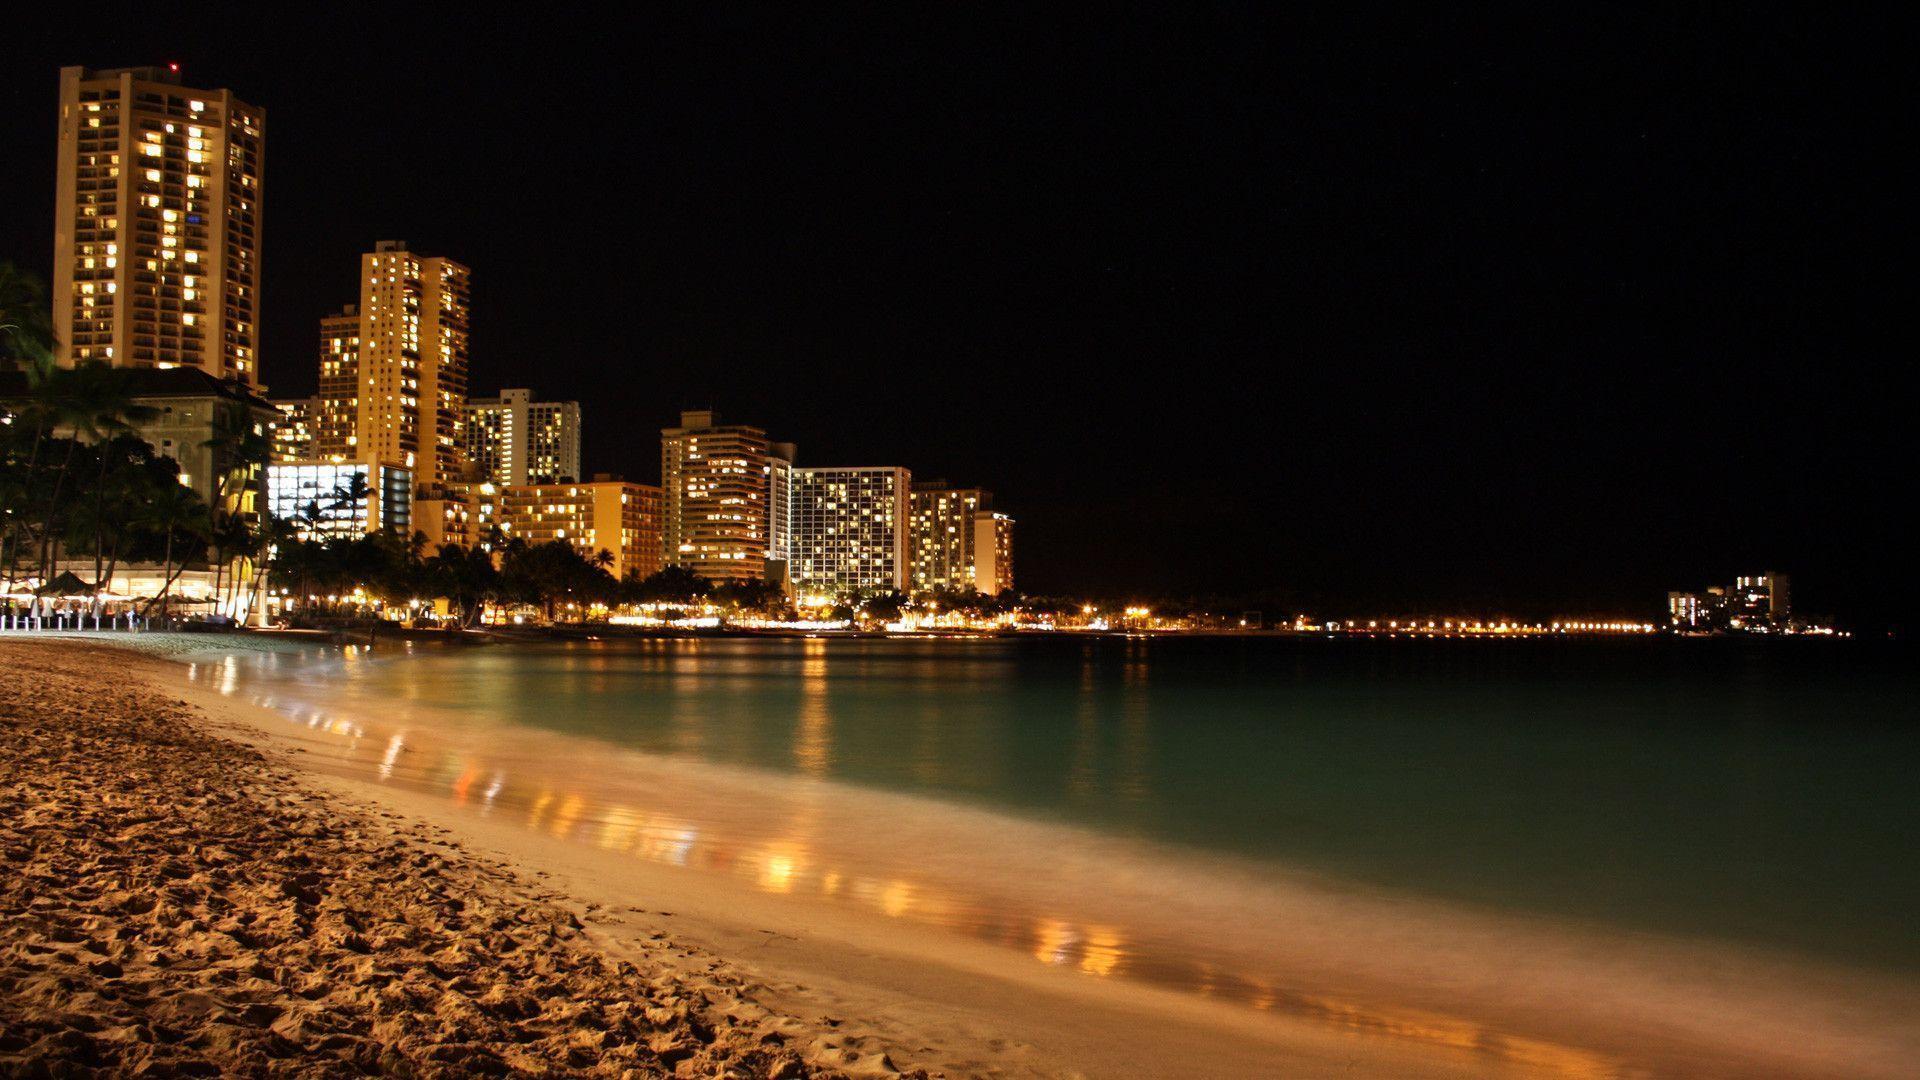 Hawaii Beach At night Wallpaper And Background